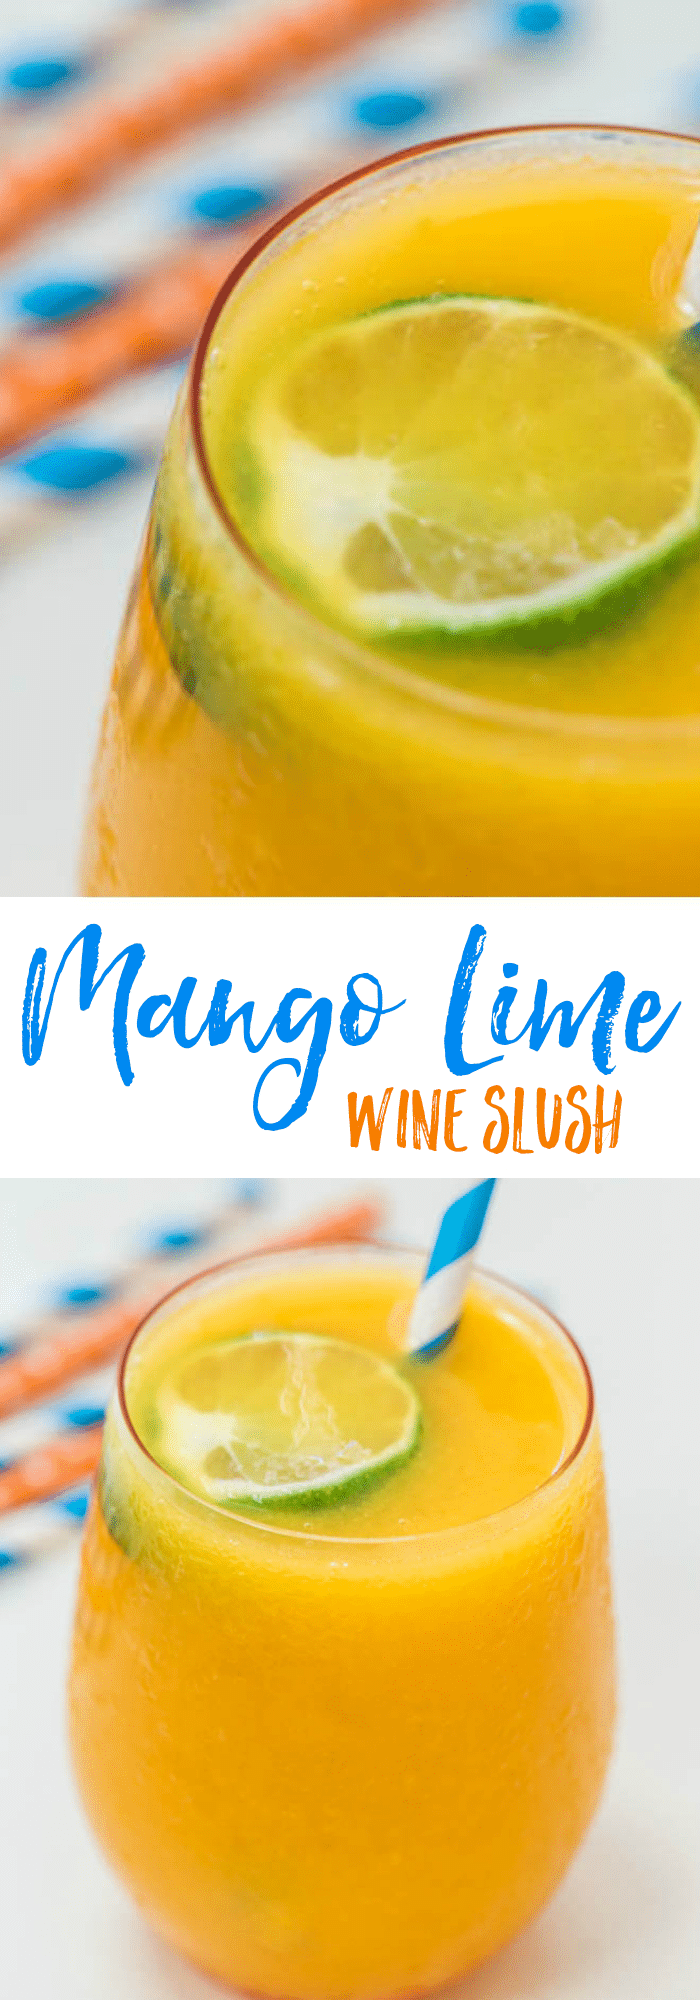 Mango Lime Wine Slush Cocktail Drink Recipe perfect for outside party this summer 